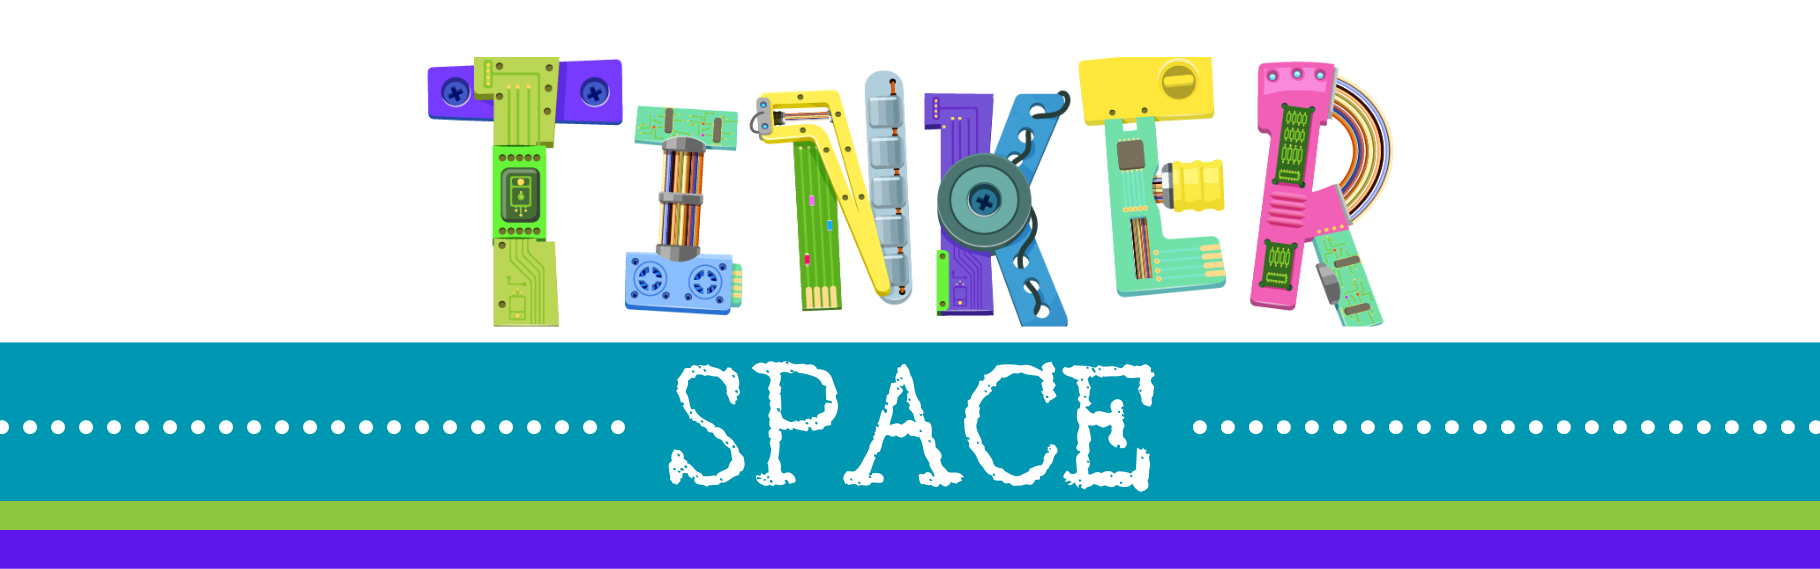 Tinker Space